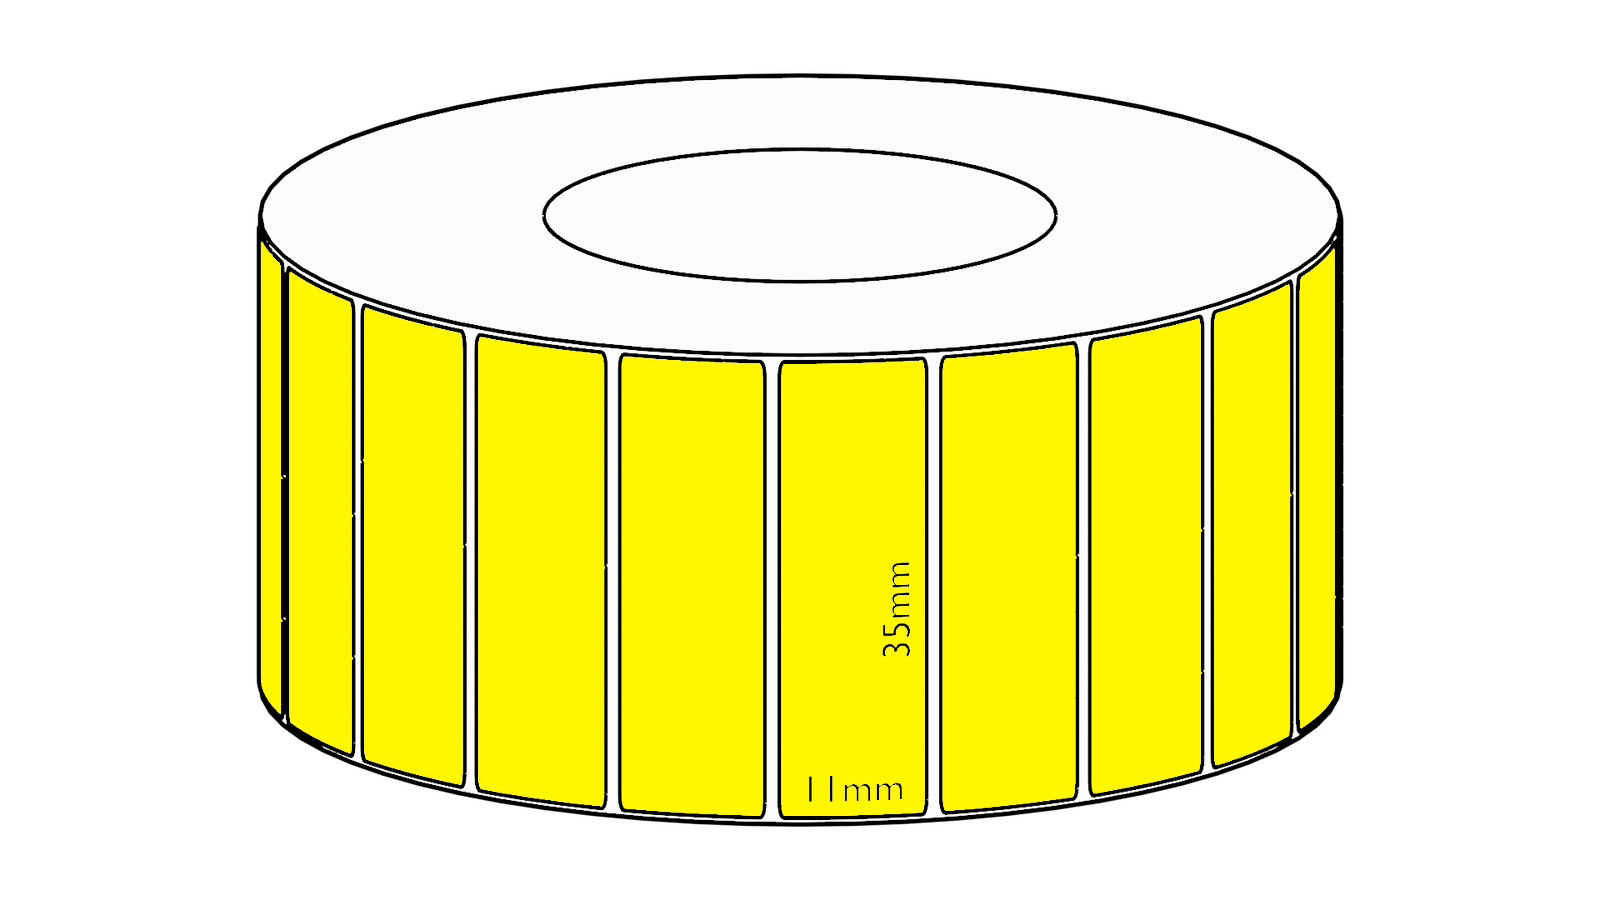 35x11mm Yellow Direct Thermal Permanent Label, 3550 per roll, 38mm core